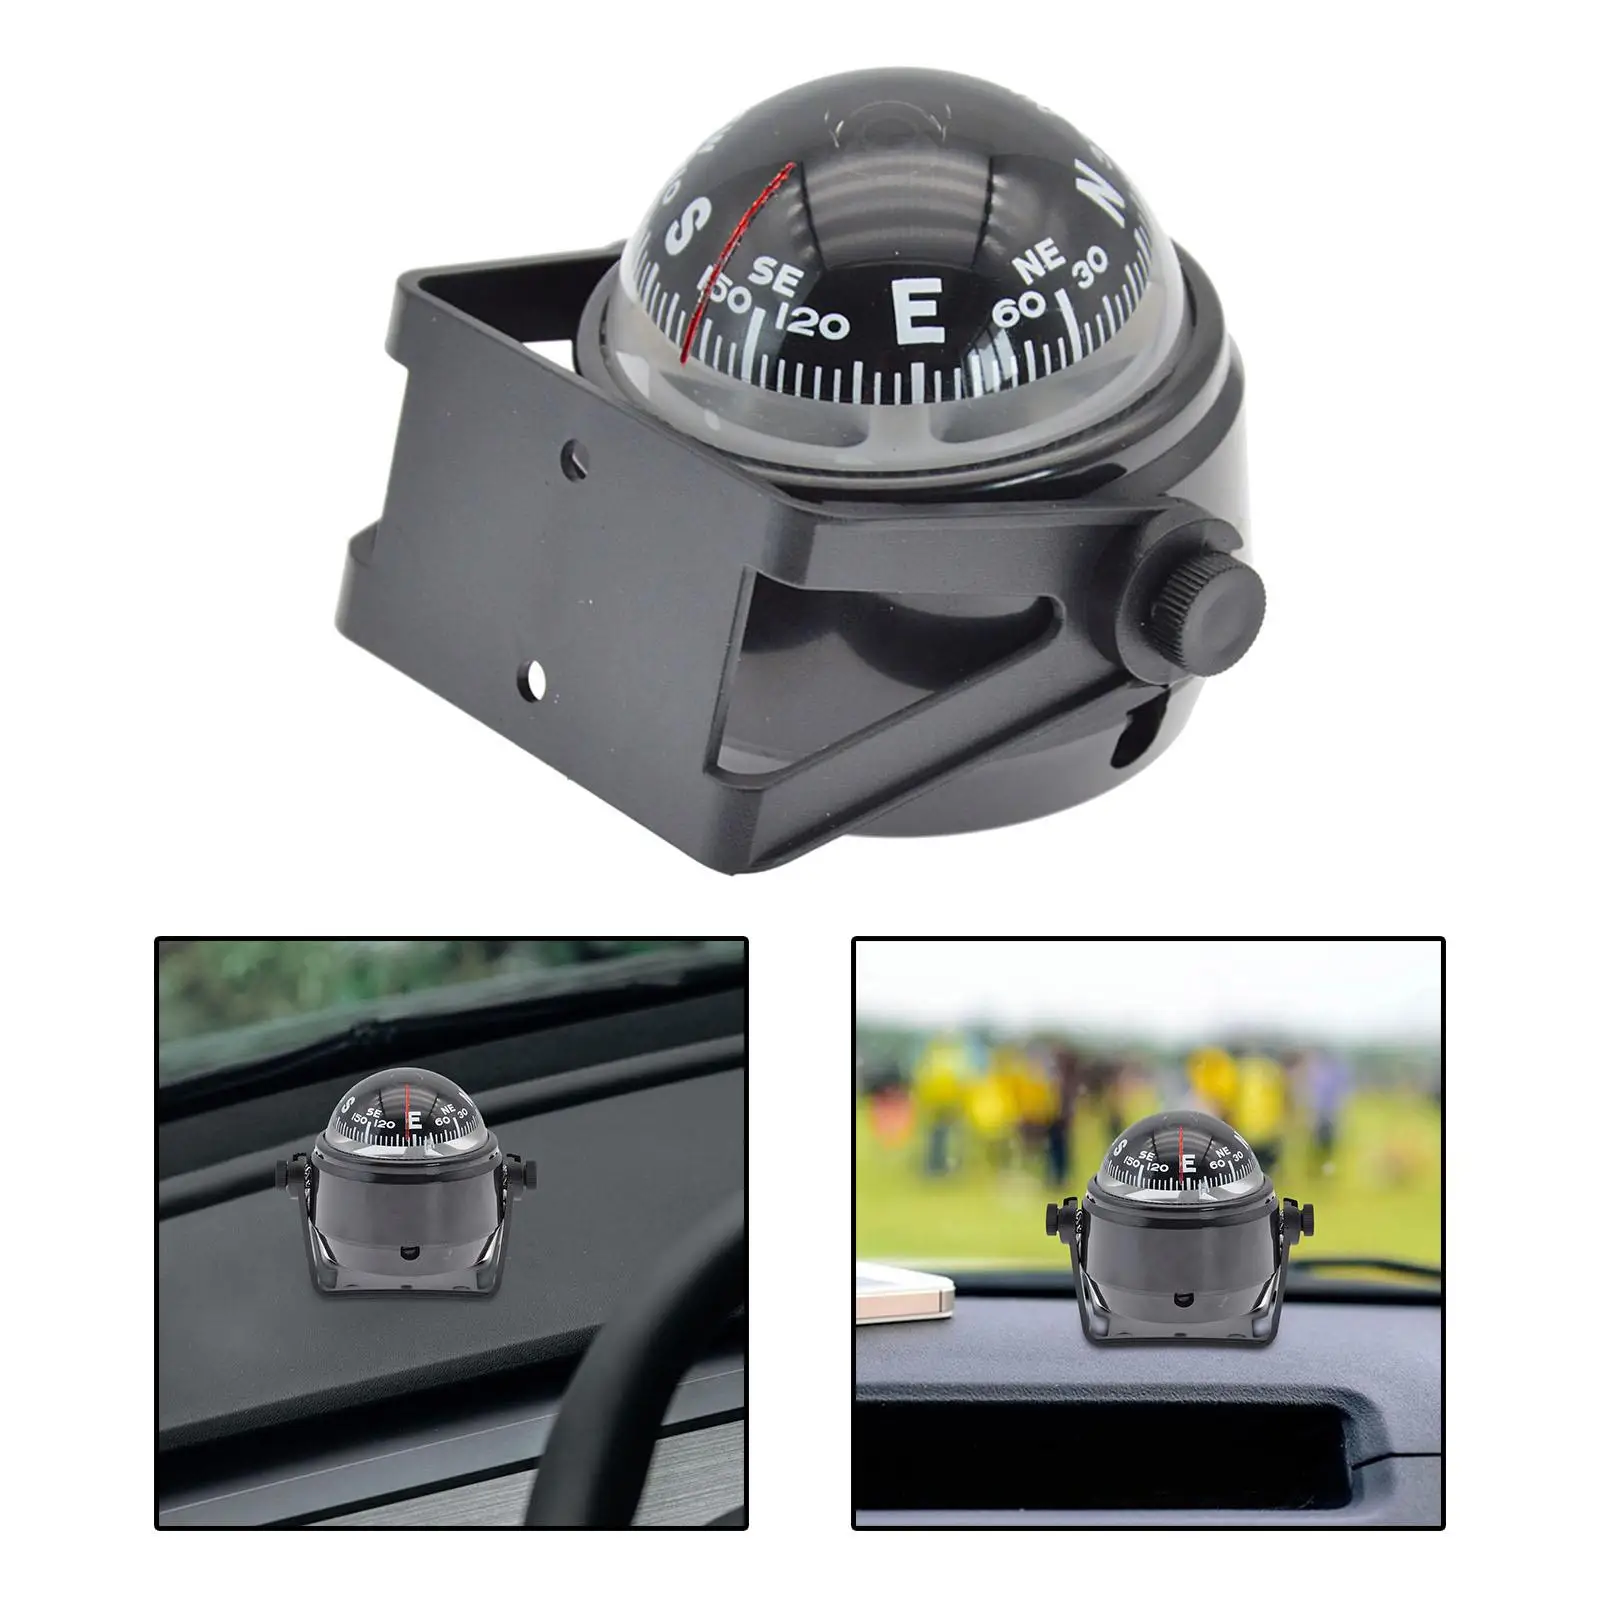 Car Compass Ball High Precision  Automotive Navigation Direction Pointing  Compass for Boat Marine,Camping Sports,Boating